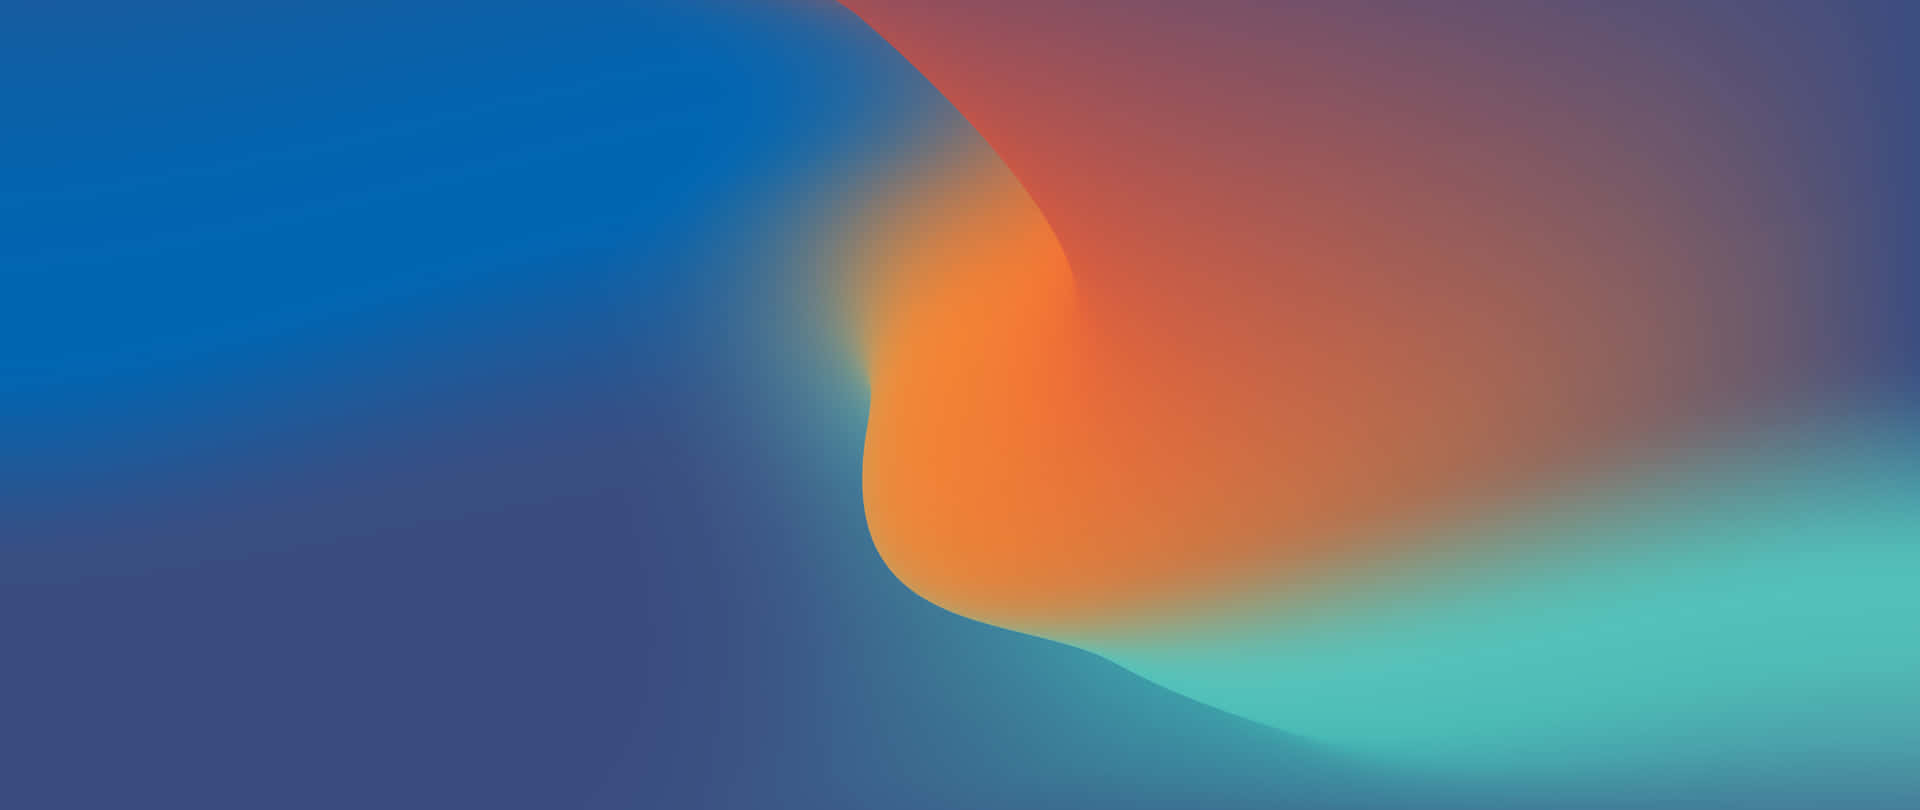 An Abstract Blue And Orange Background Wallpaper